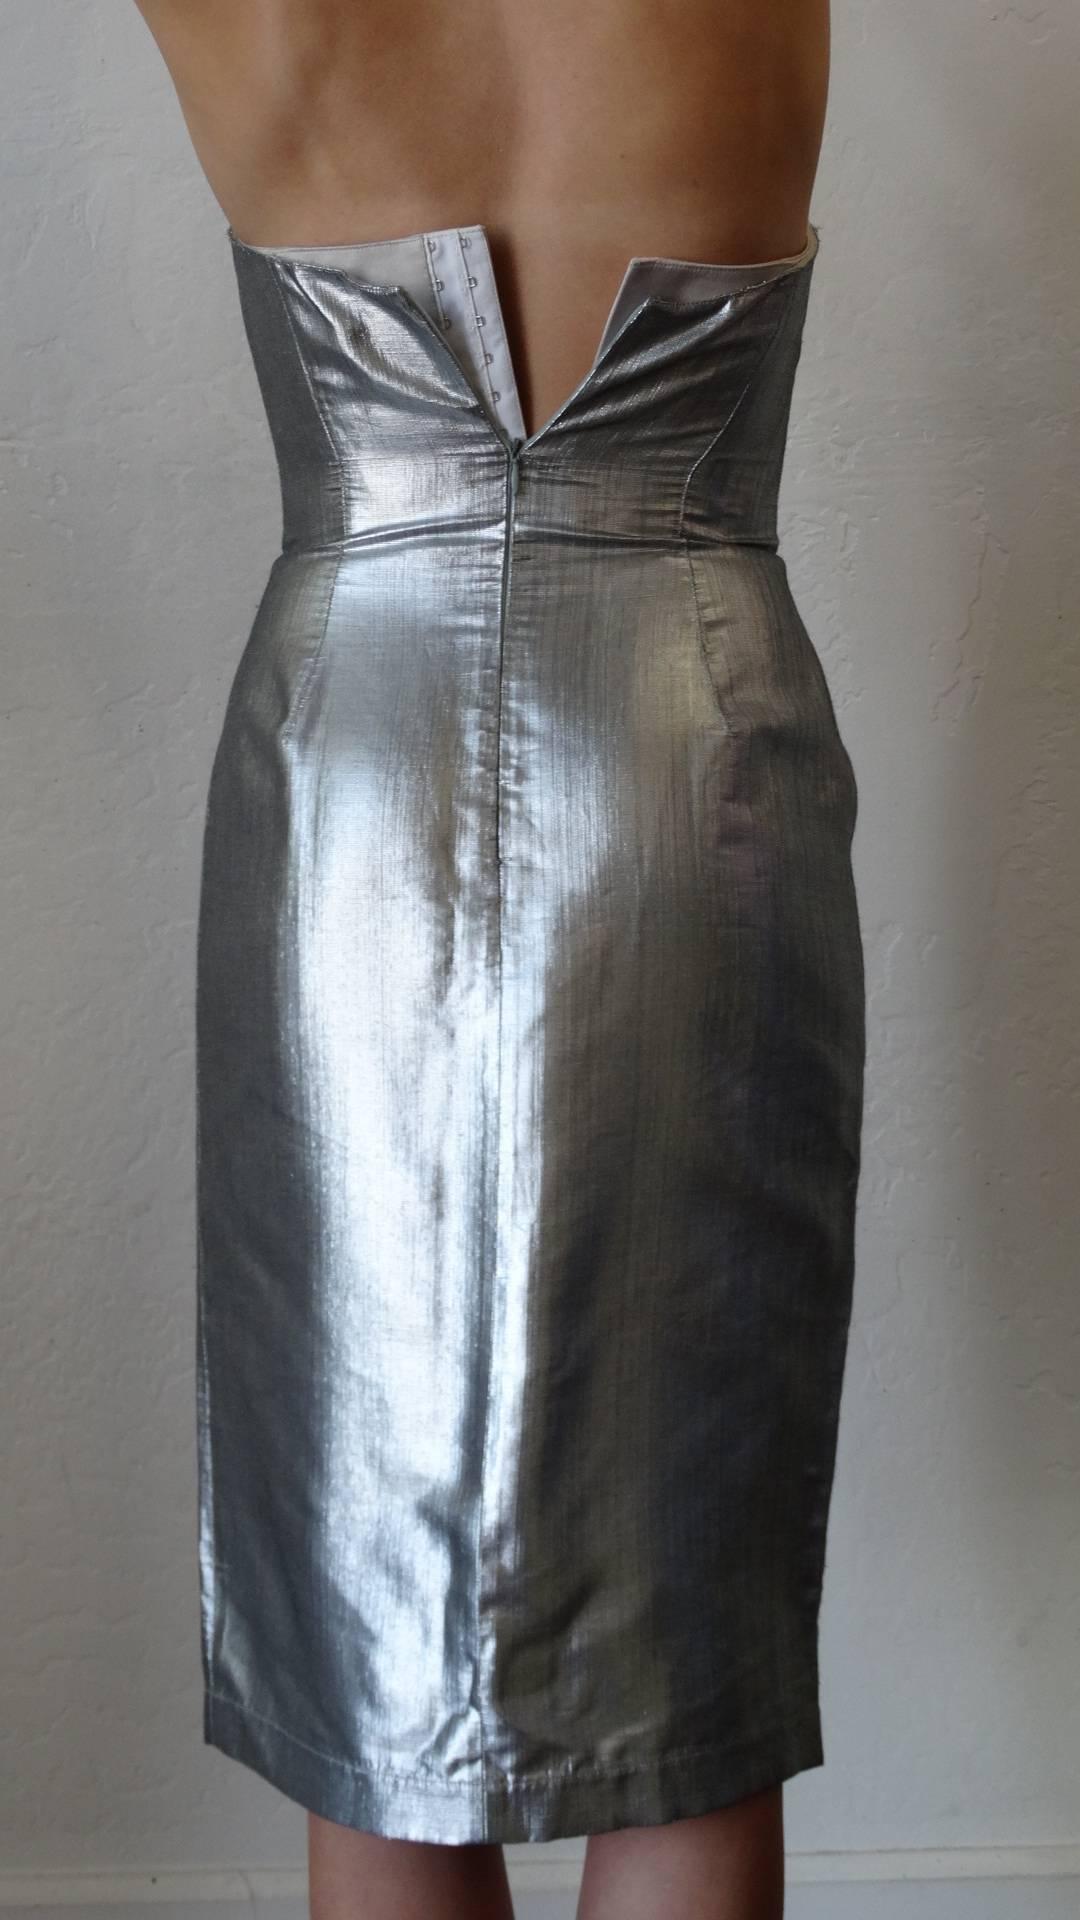  Thierry Mugler Couture Silver Sculpture Dress, Spring 1989 For Sale 3